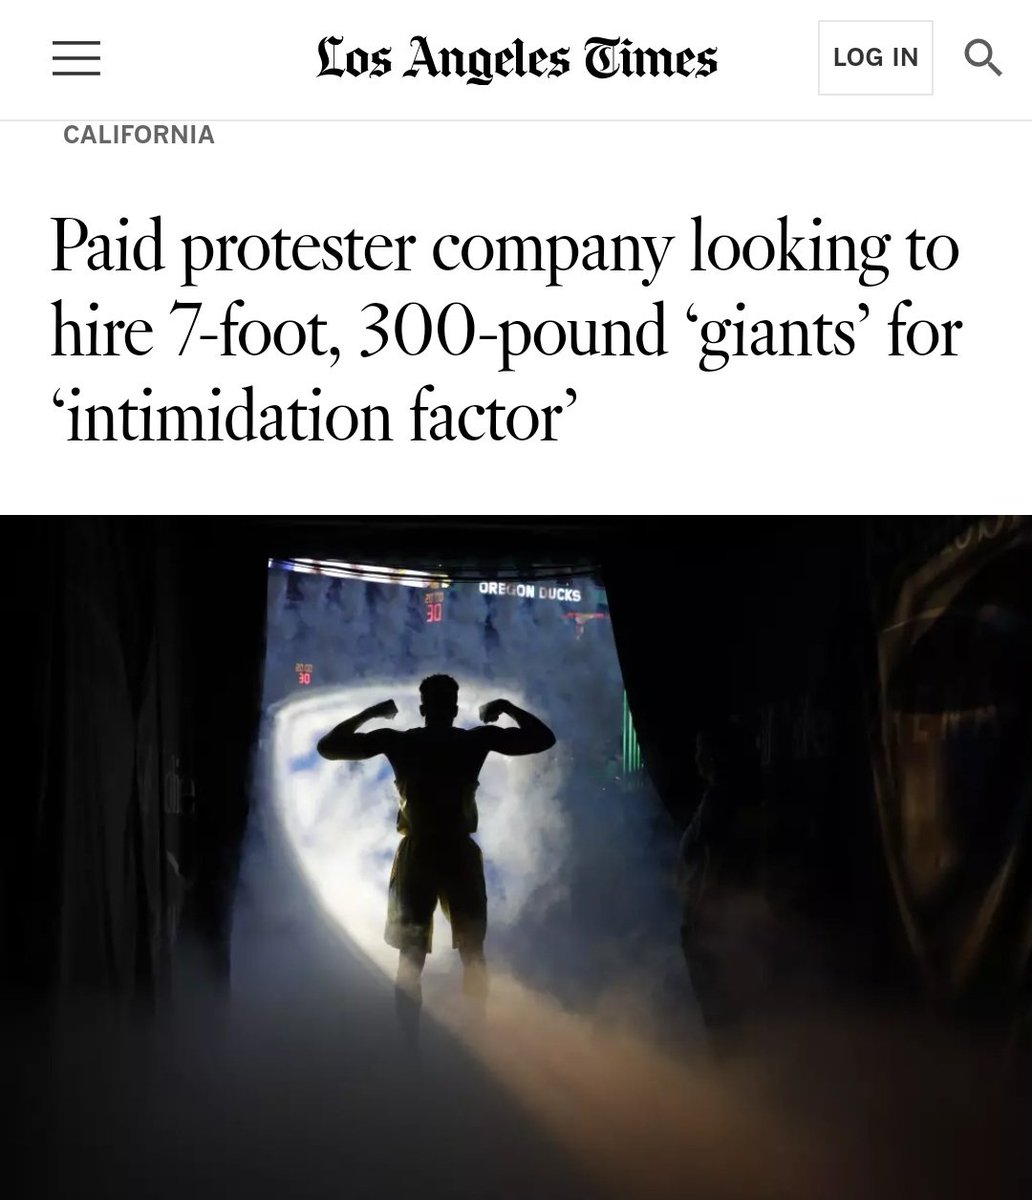 Oh my god, Antifa is hiring giants for the protests